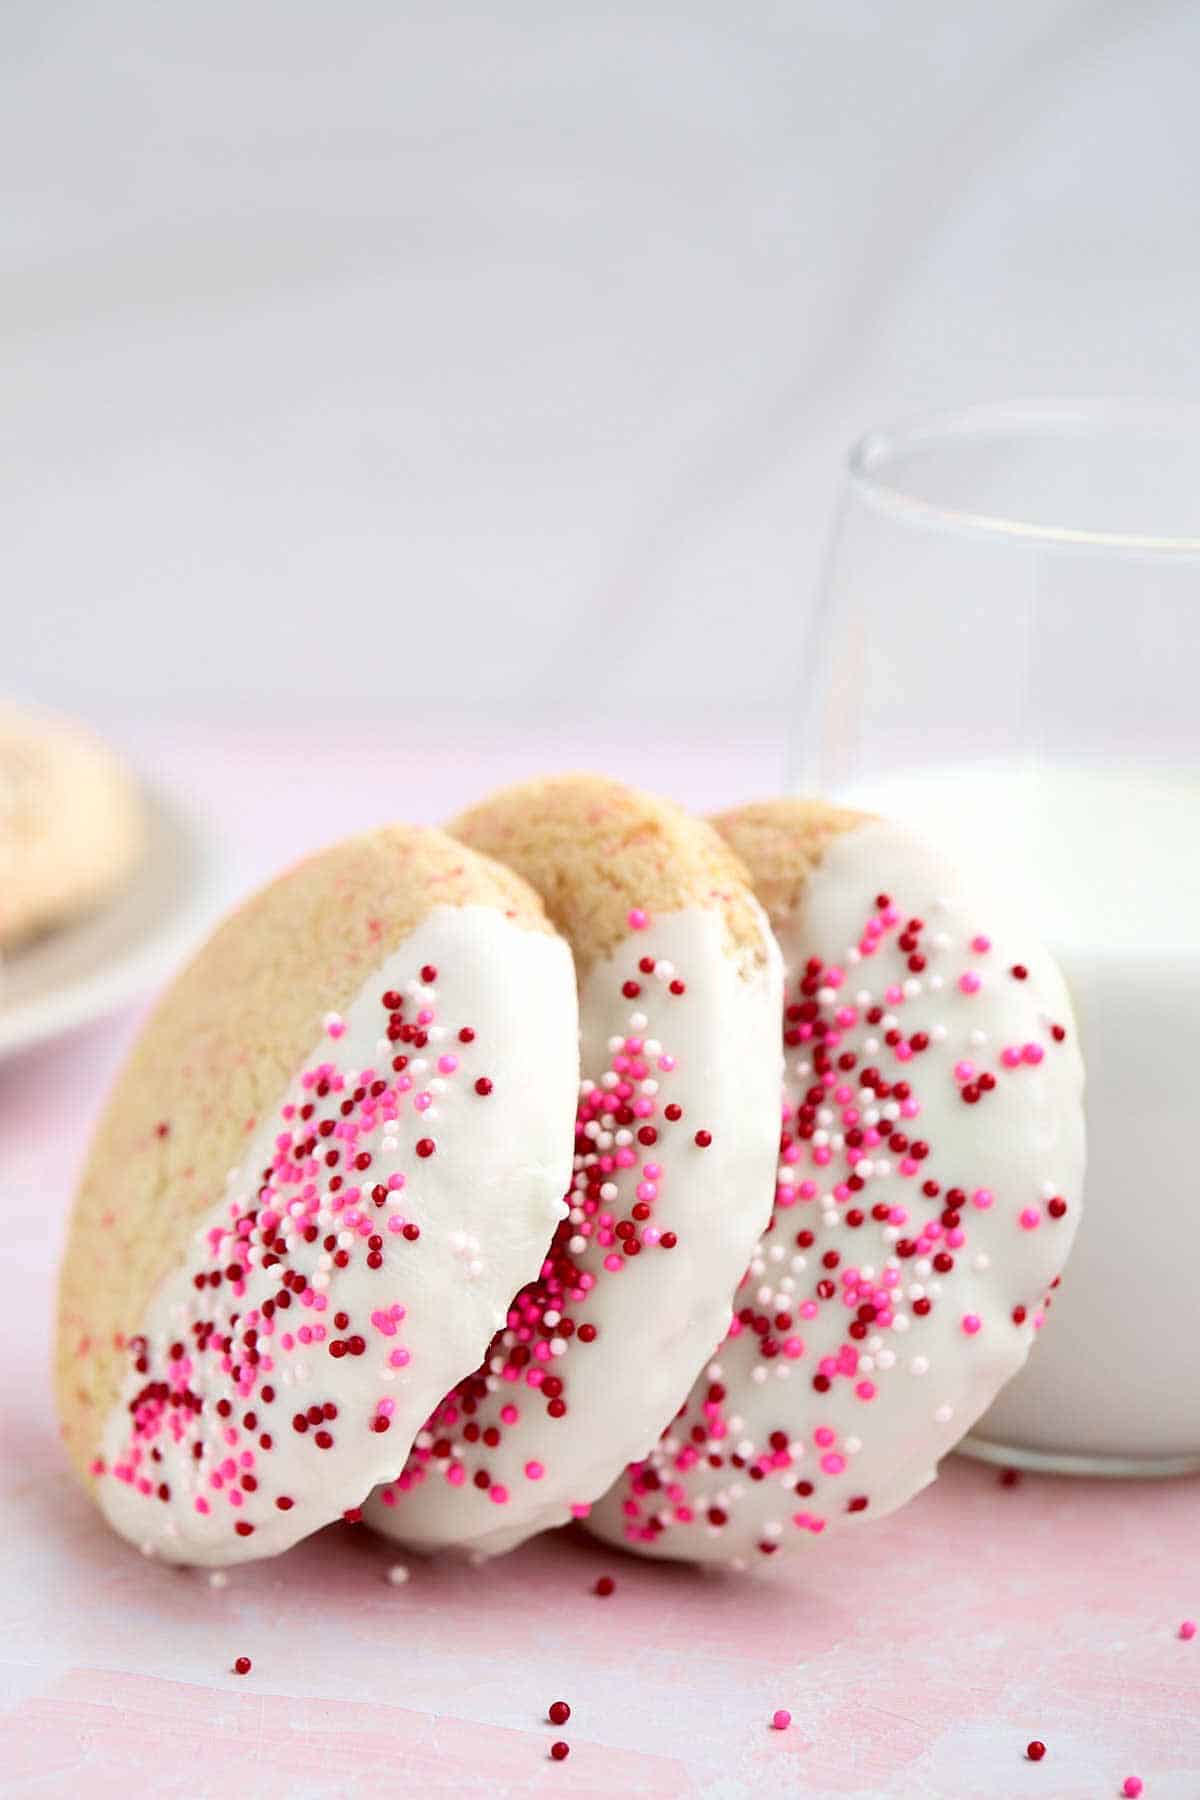 Three cherry chip cake mix cookies leaning against a glass of milk.